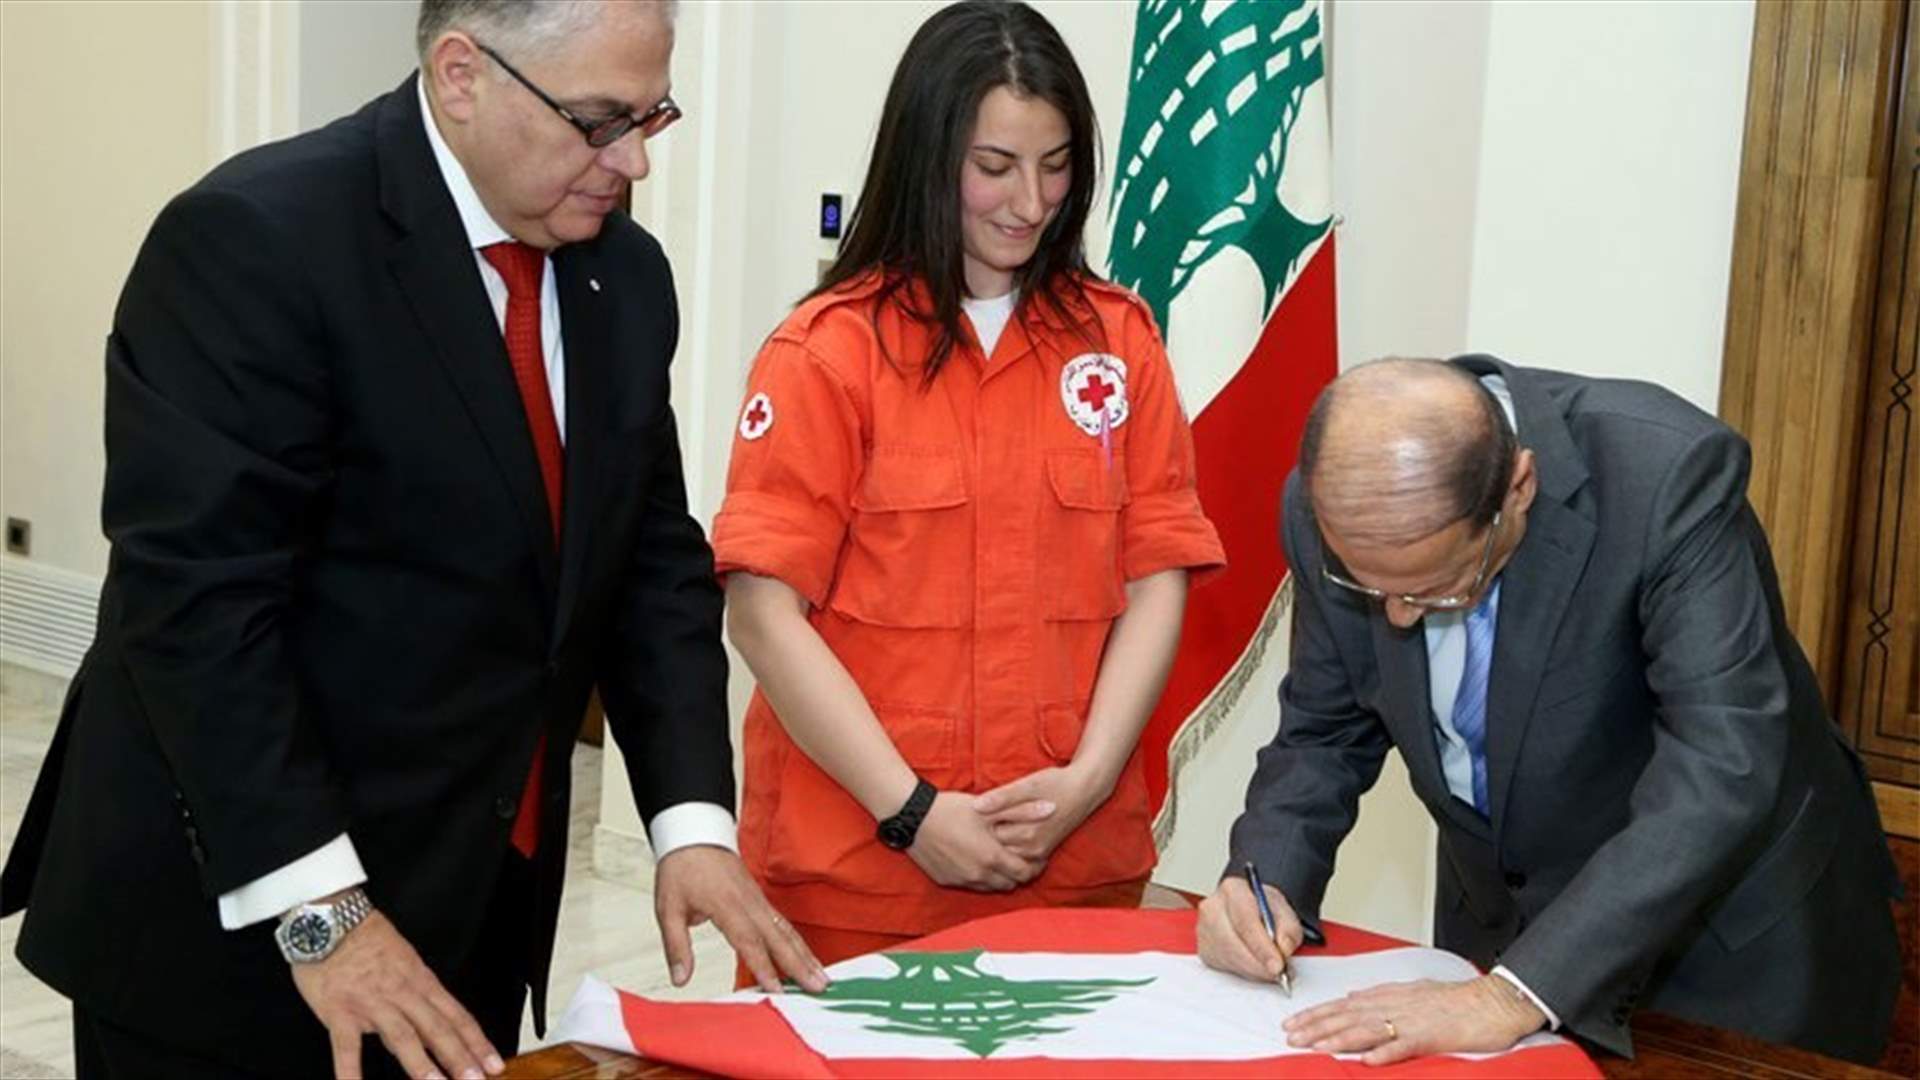 President Aoun signs on Lebanese flag to be fixed by Red Cross medic on Island Peak Summit